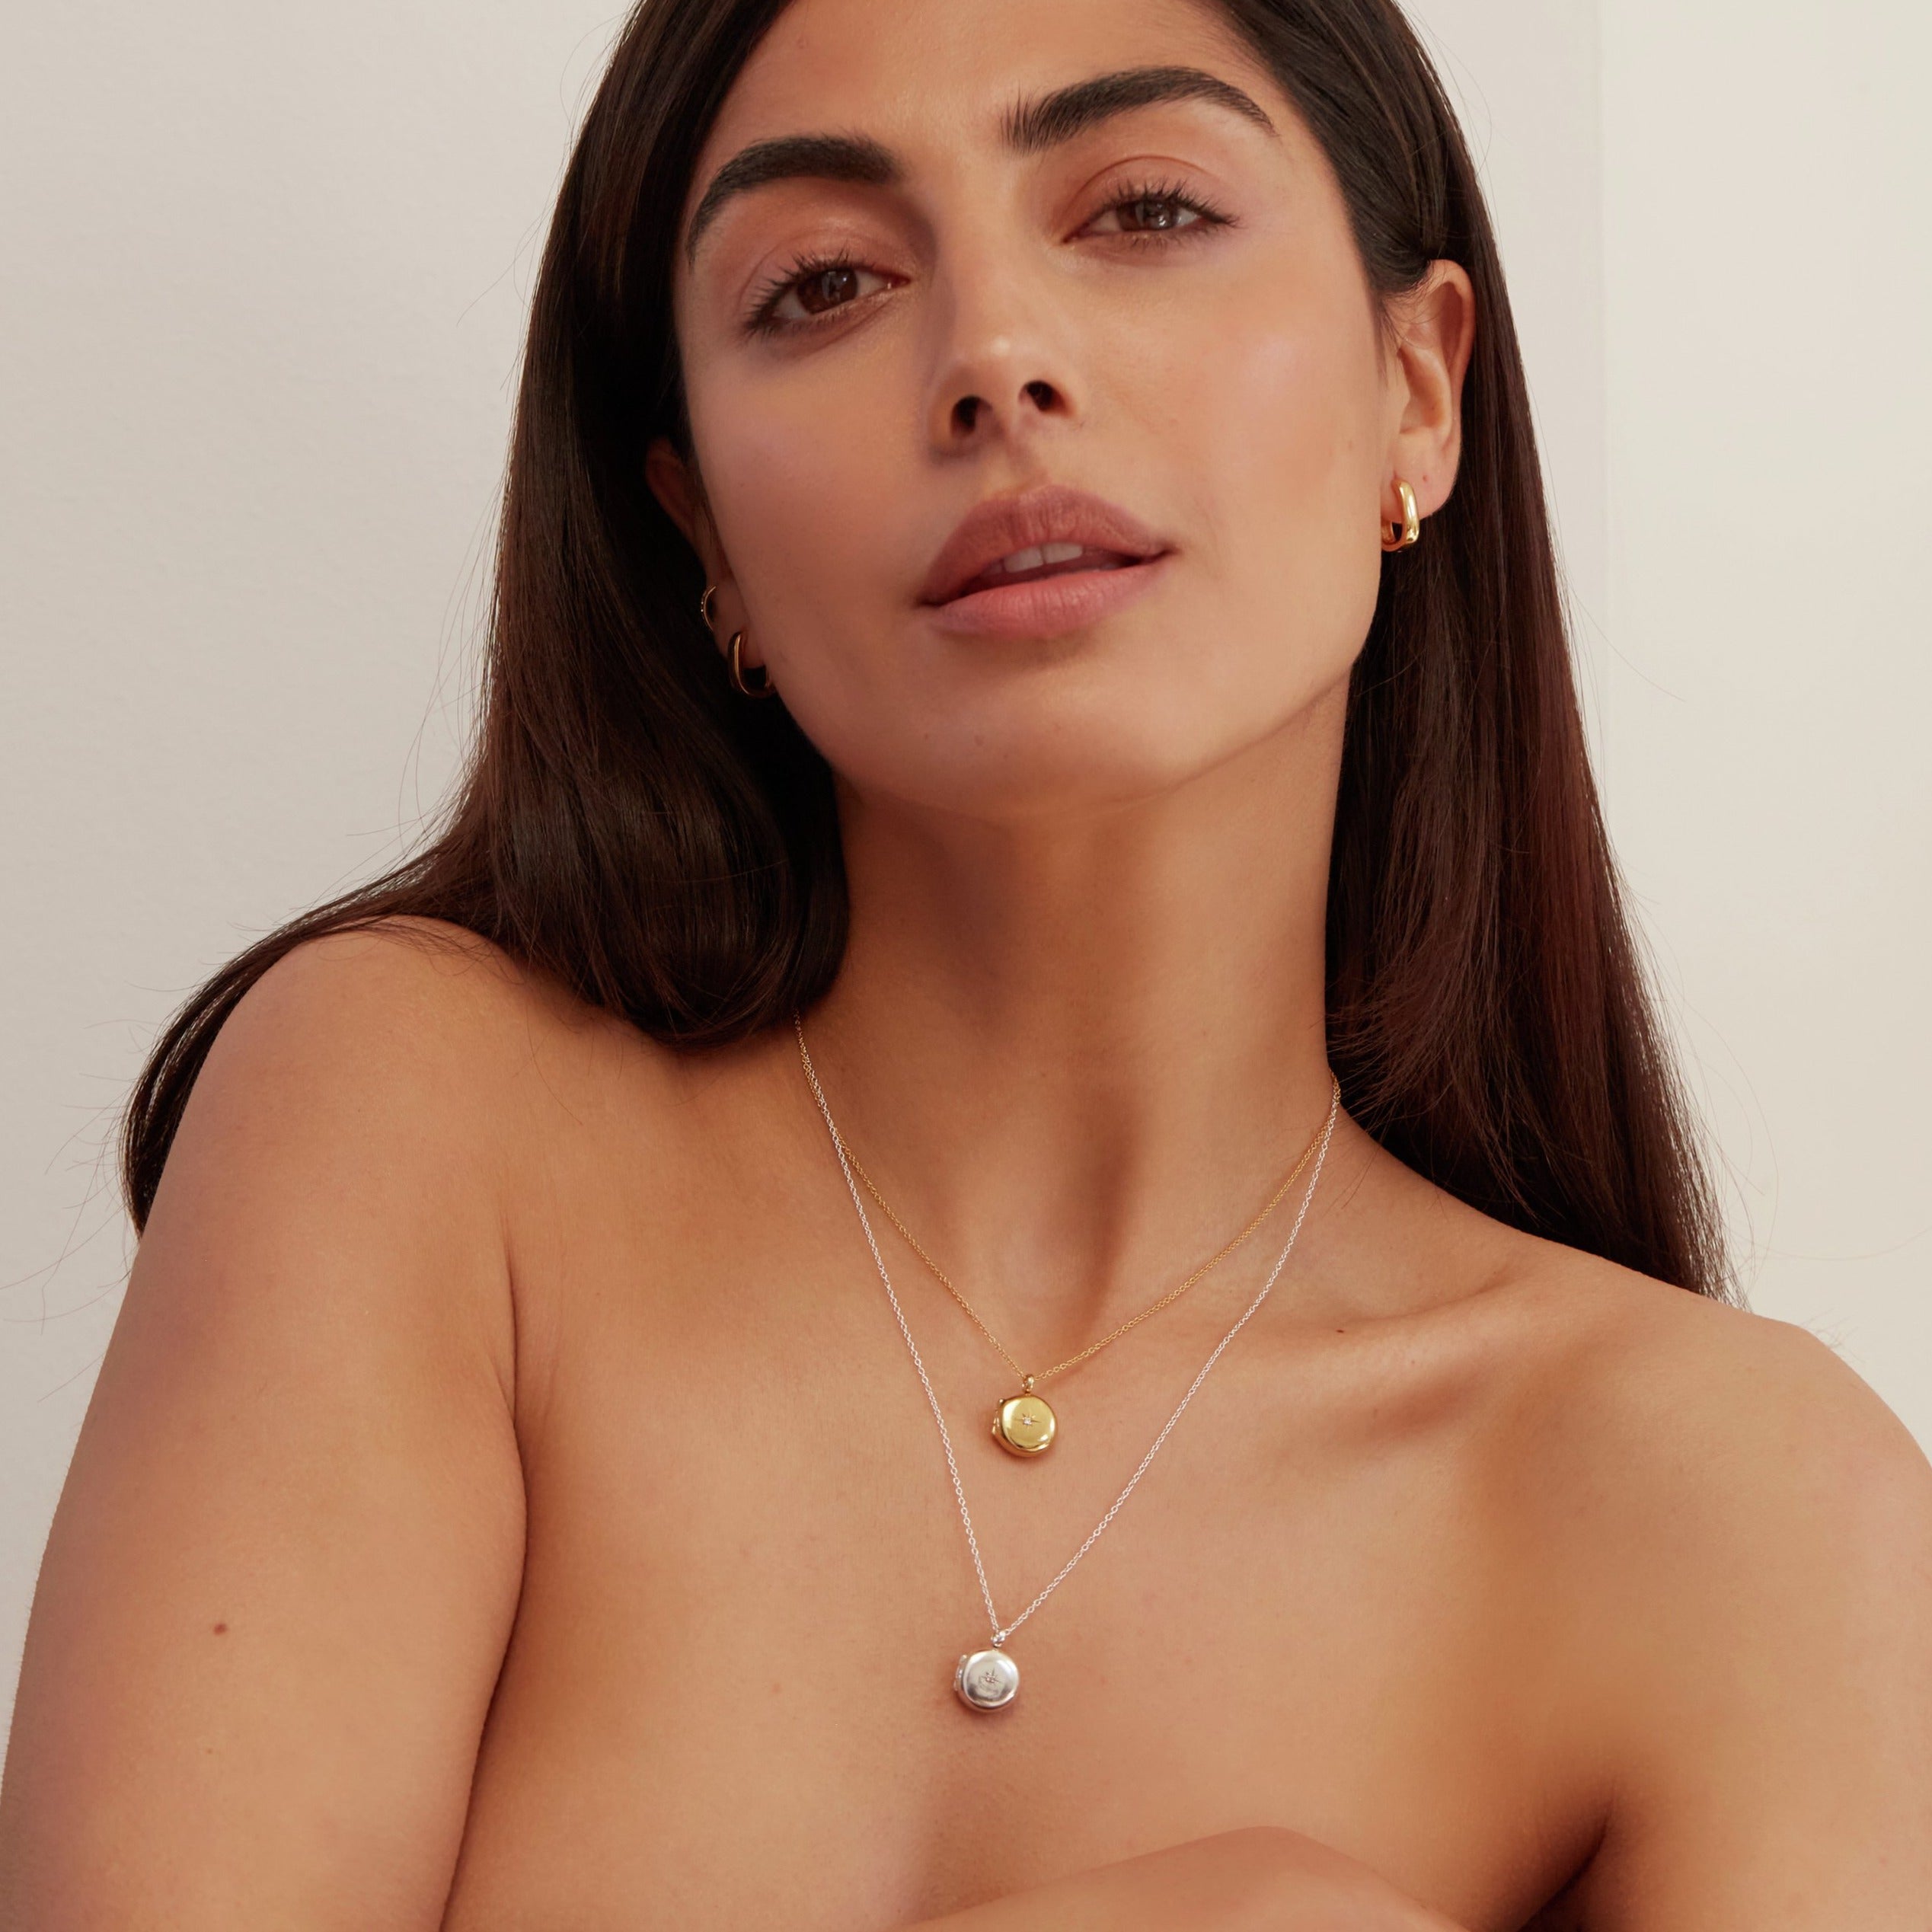 Woman wearing a silver small round diamond locket necklace layered with a gold small round diamond locket necklace around her neck and gold square edge hoop earrings in her ear lobes